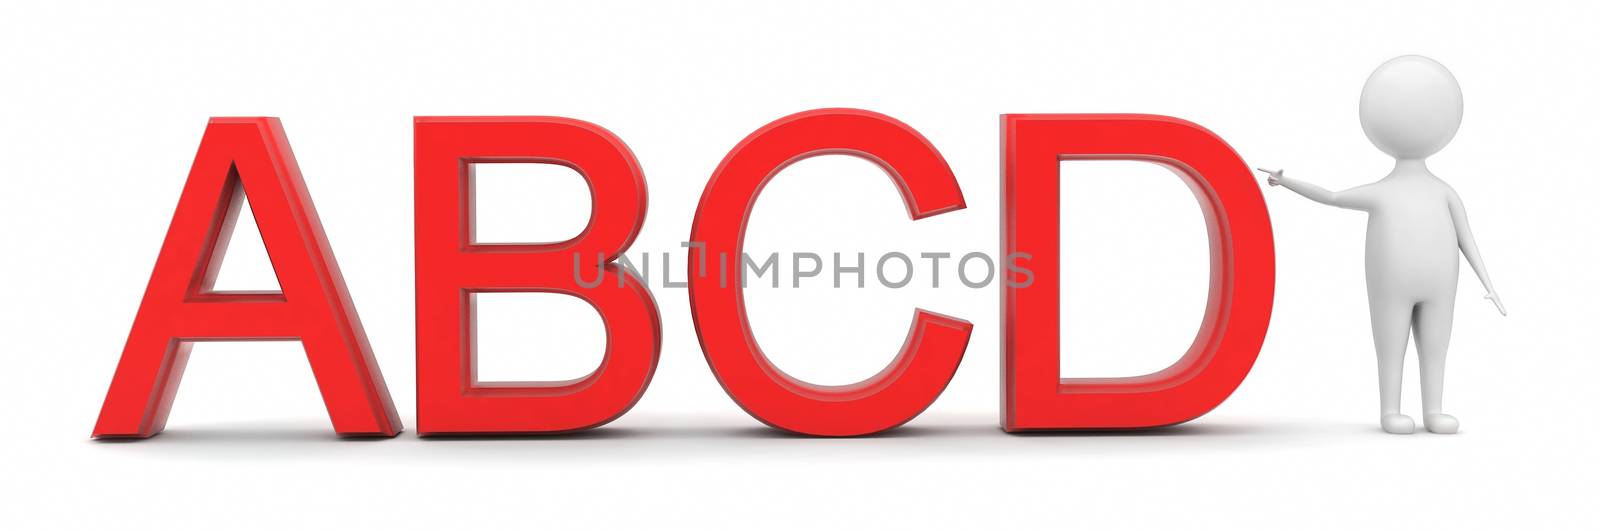 3d man pointing towards abcd text concept by qualityrender